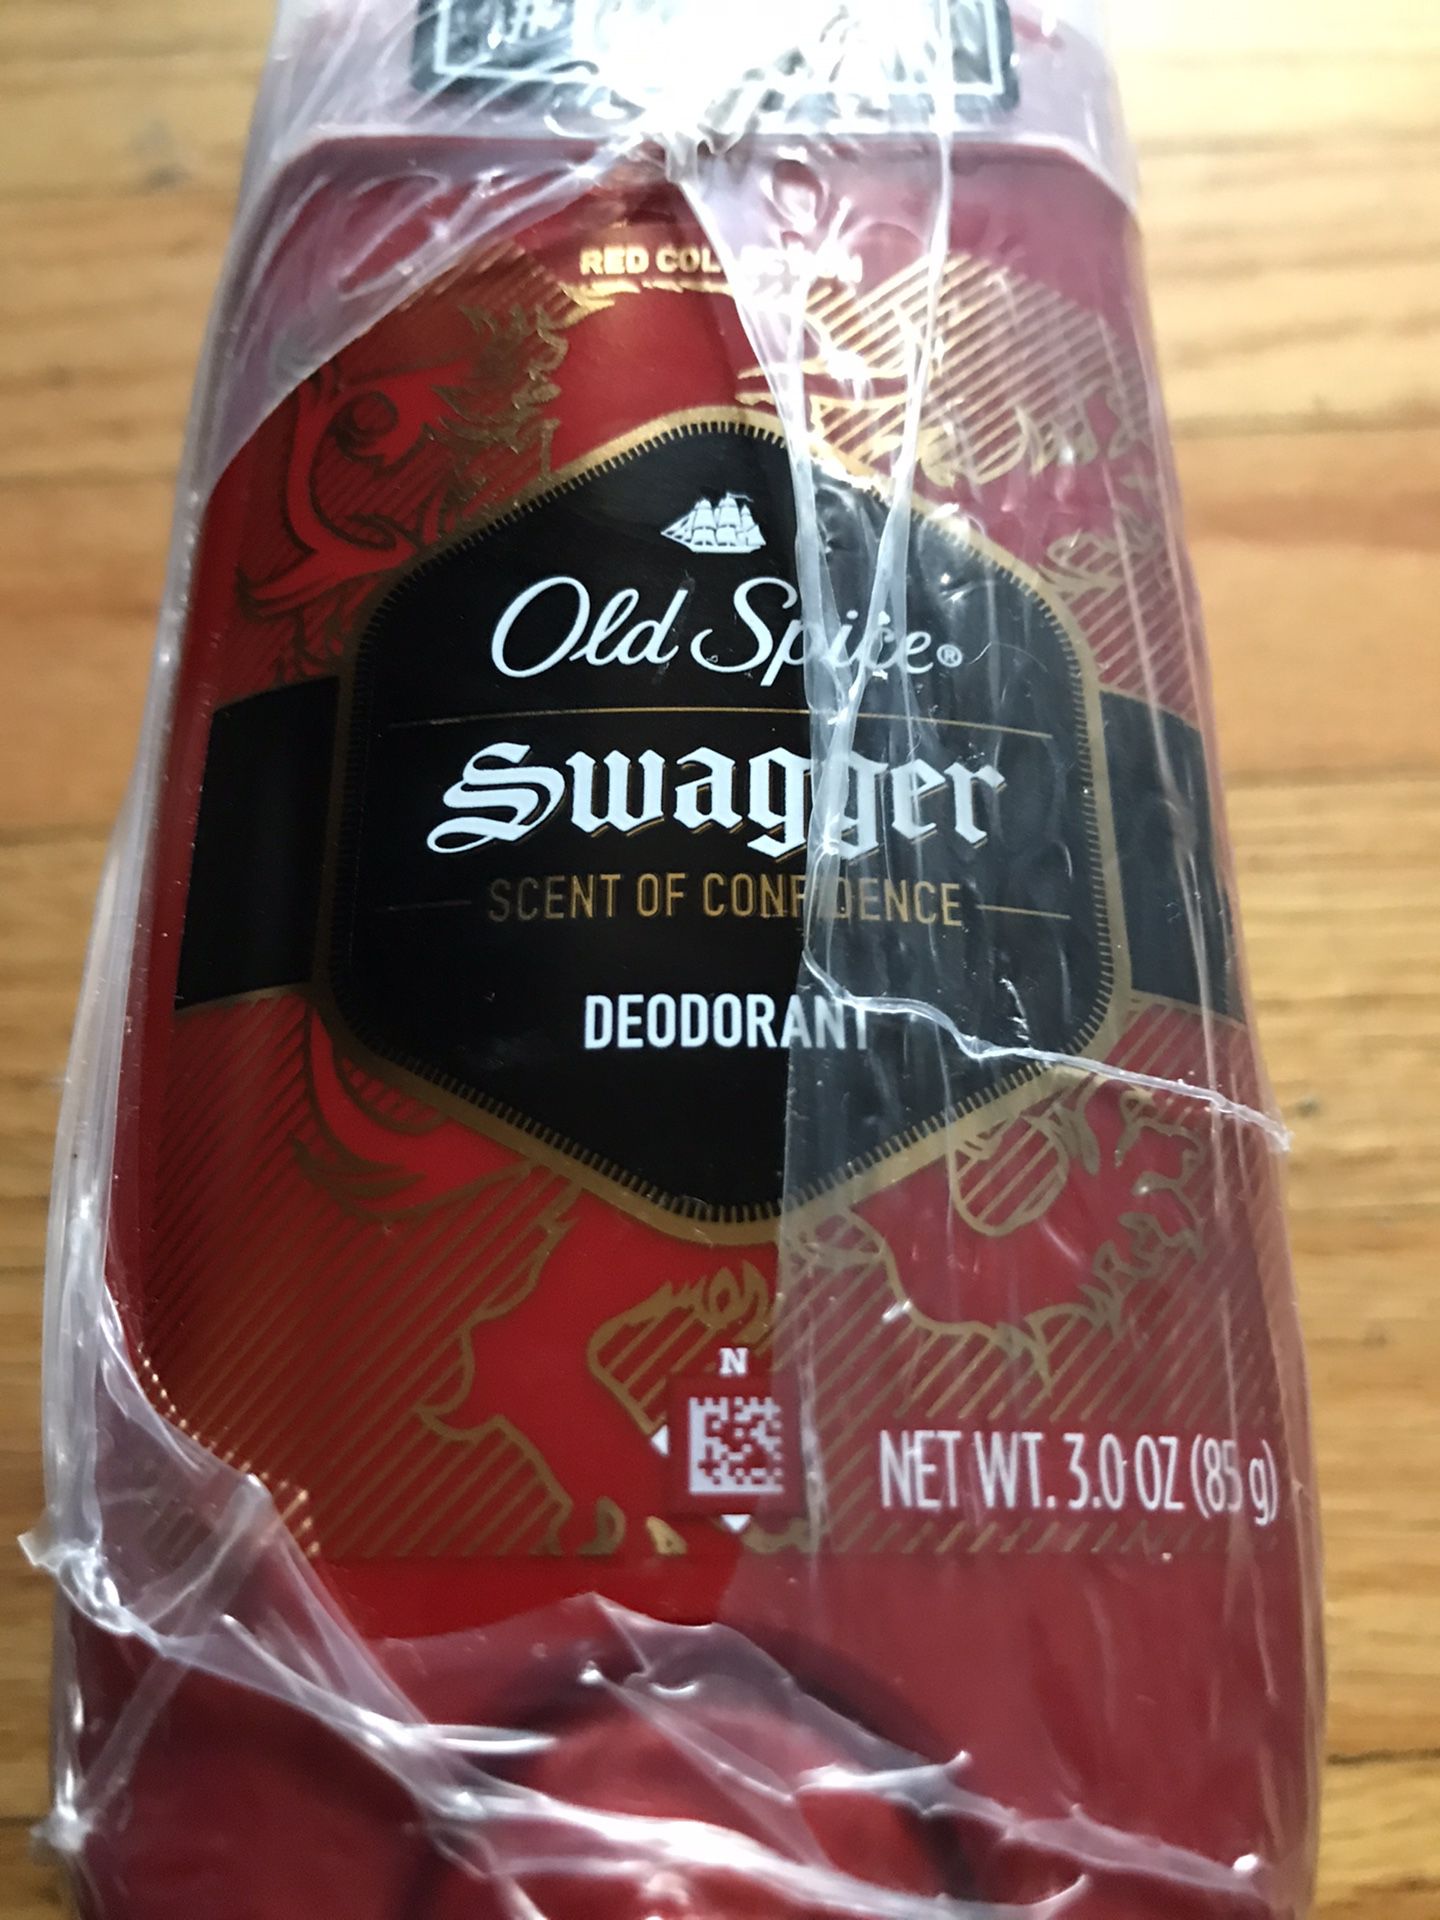 Old Spice Deodorant Swagger